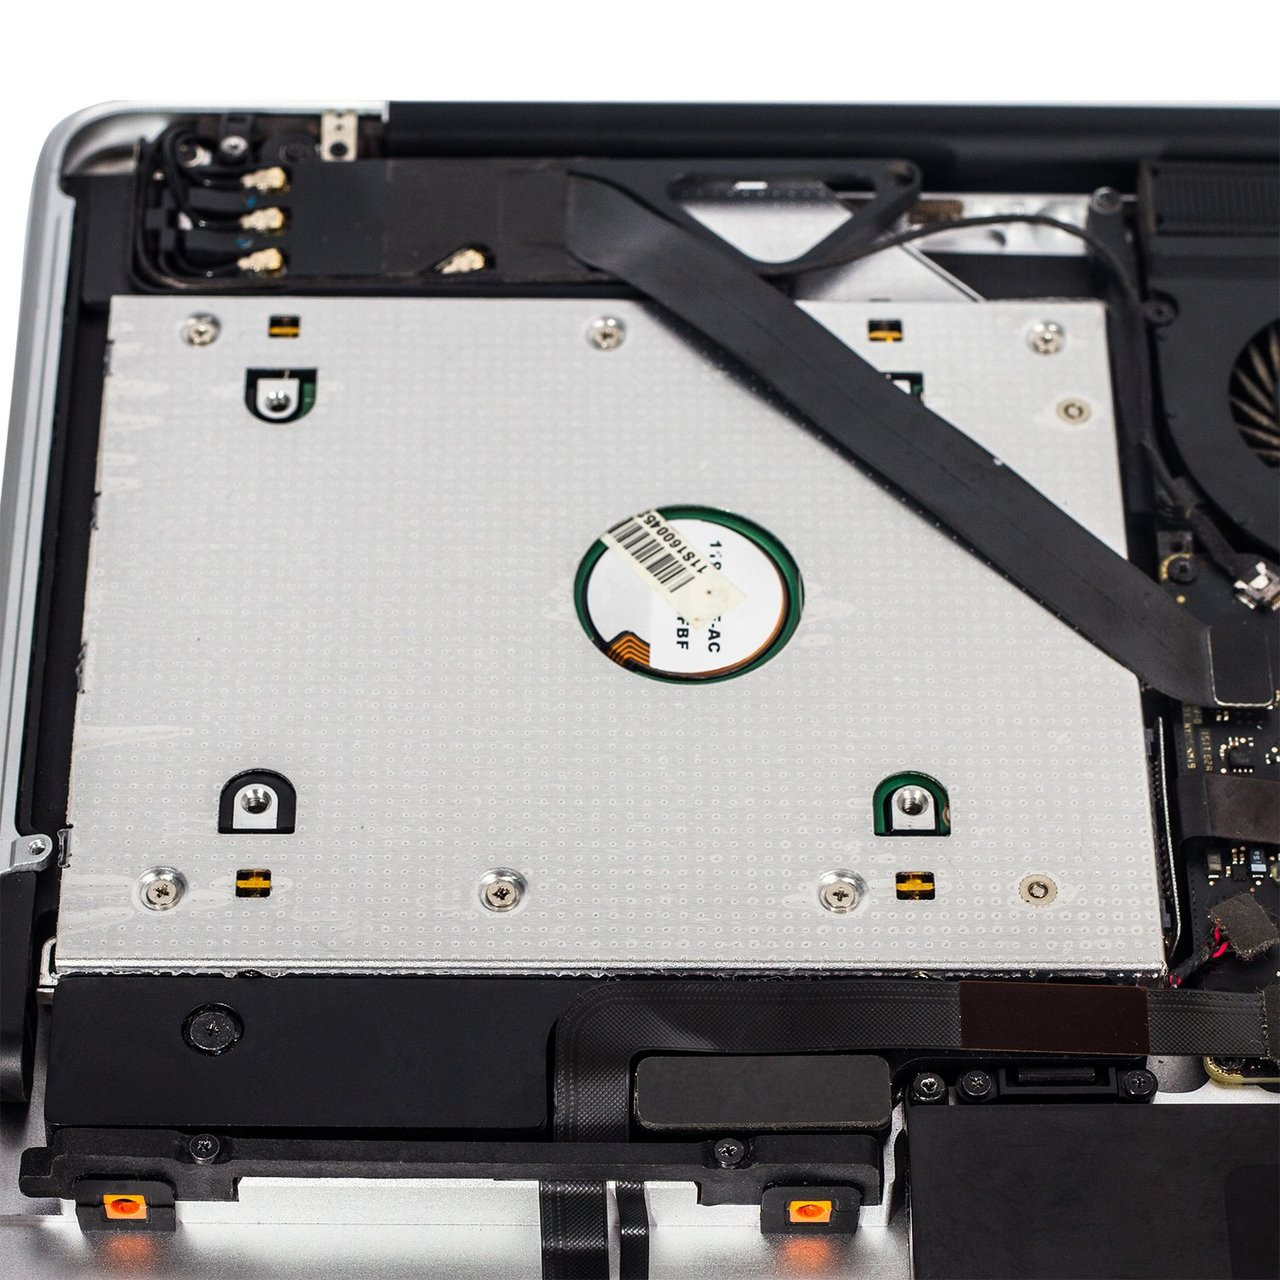 macbook pro 2012 hard drive replacement cost